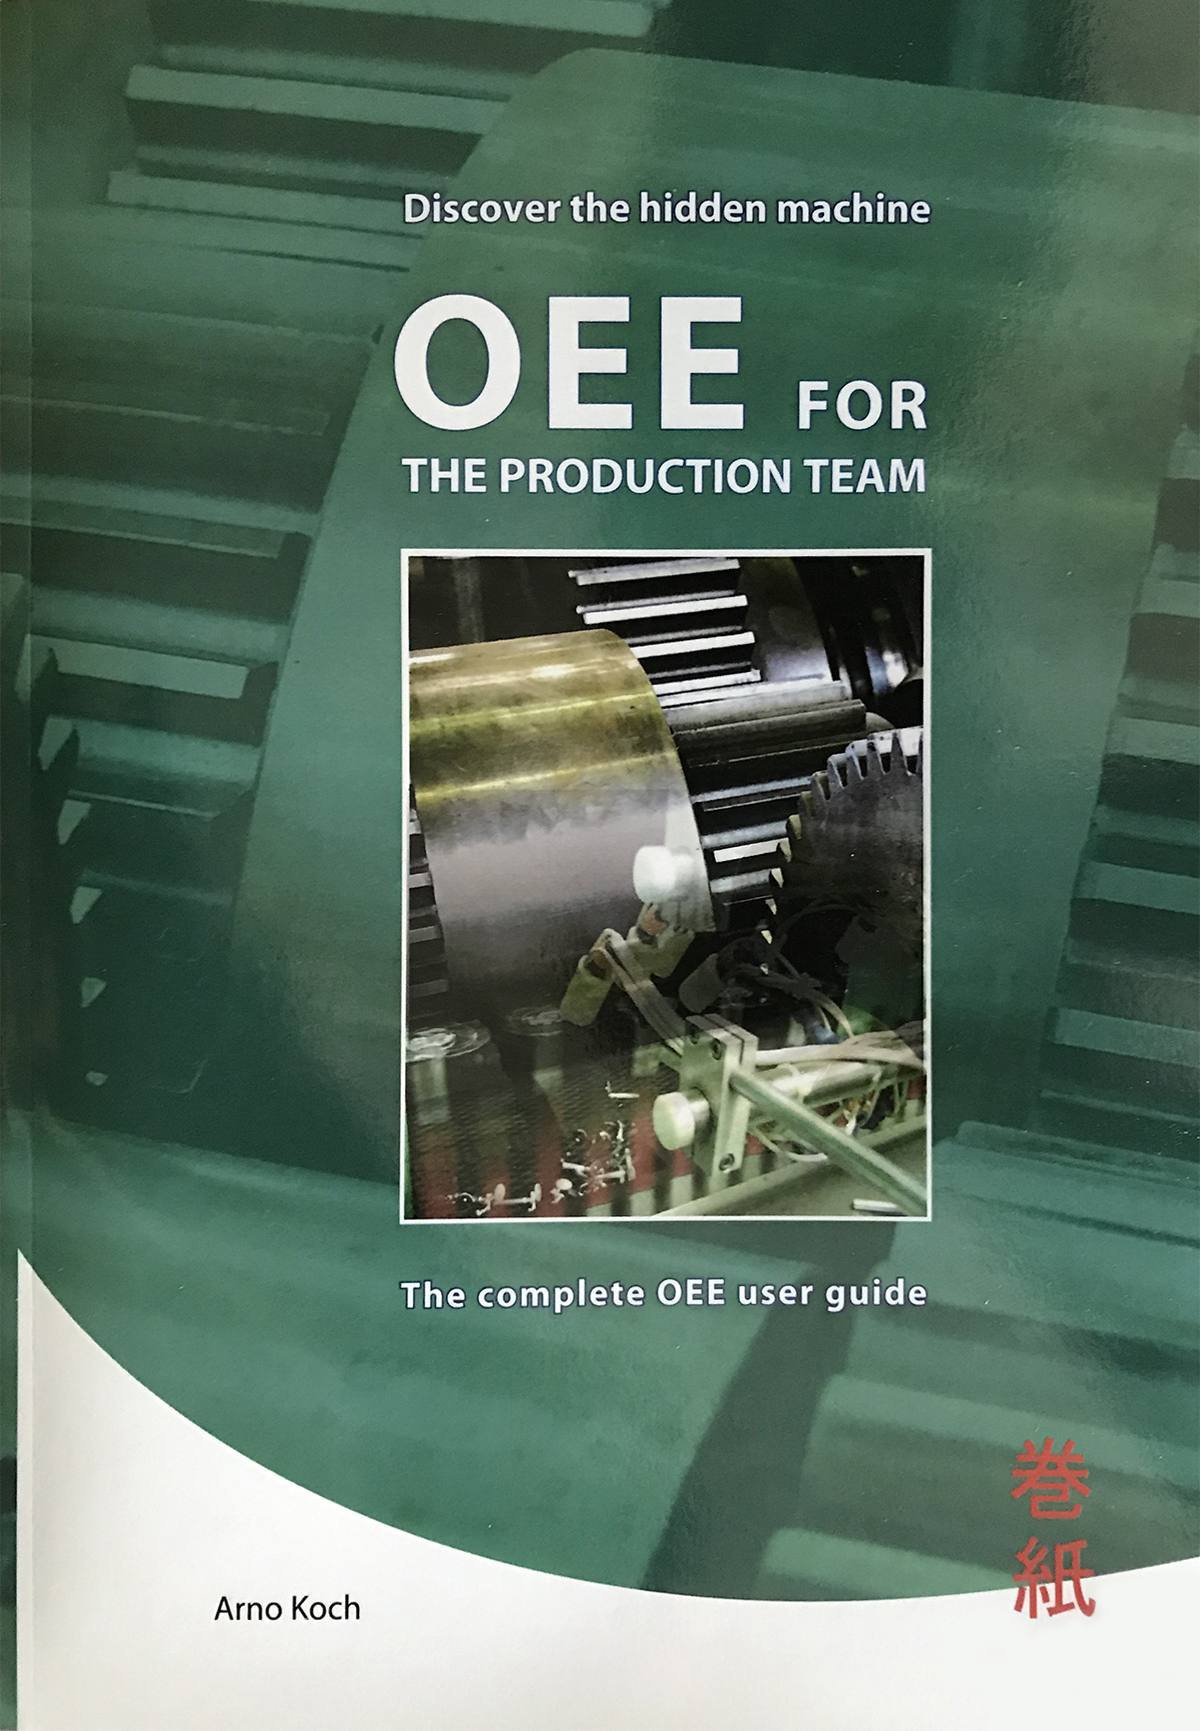 OEE Implementation